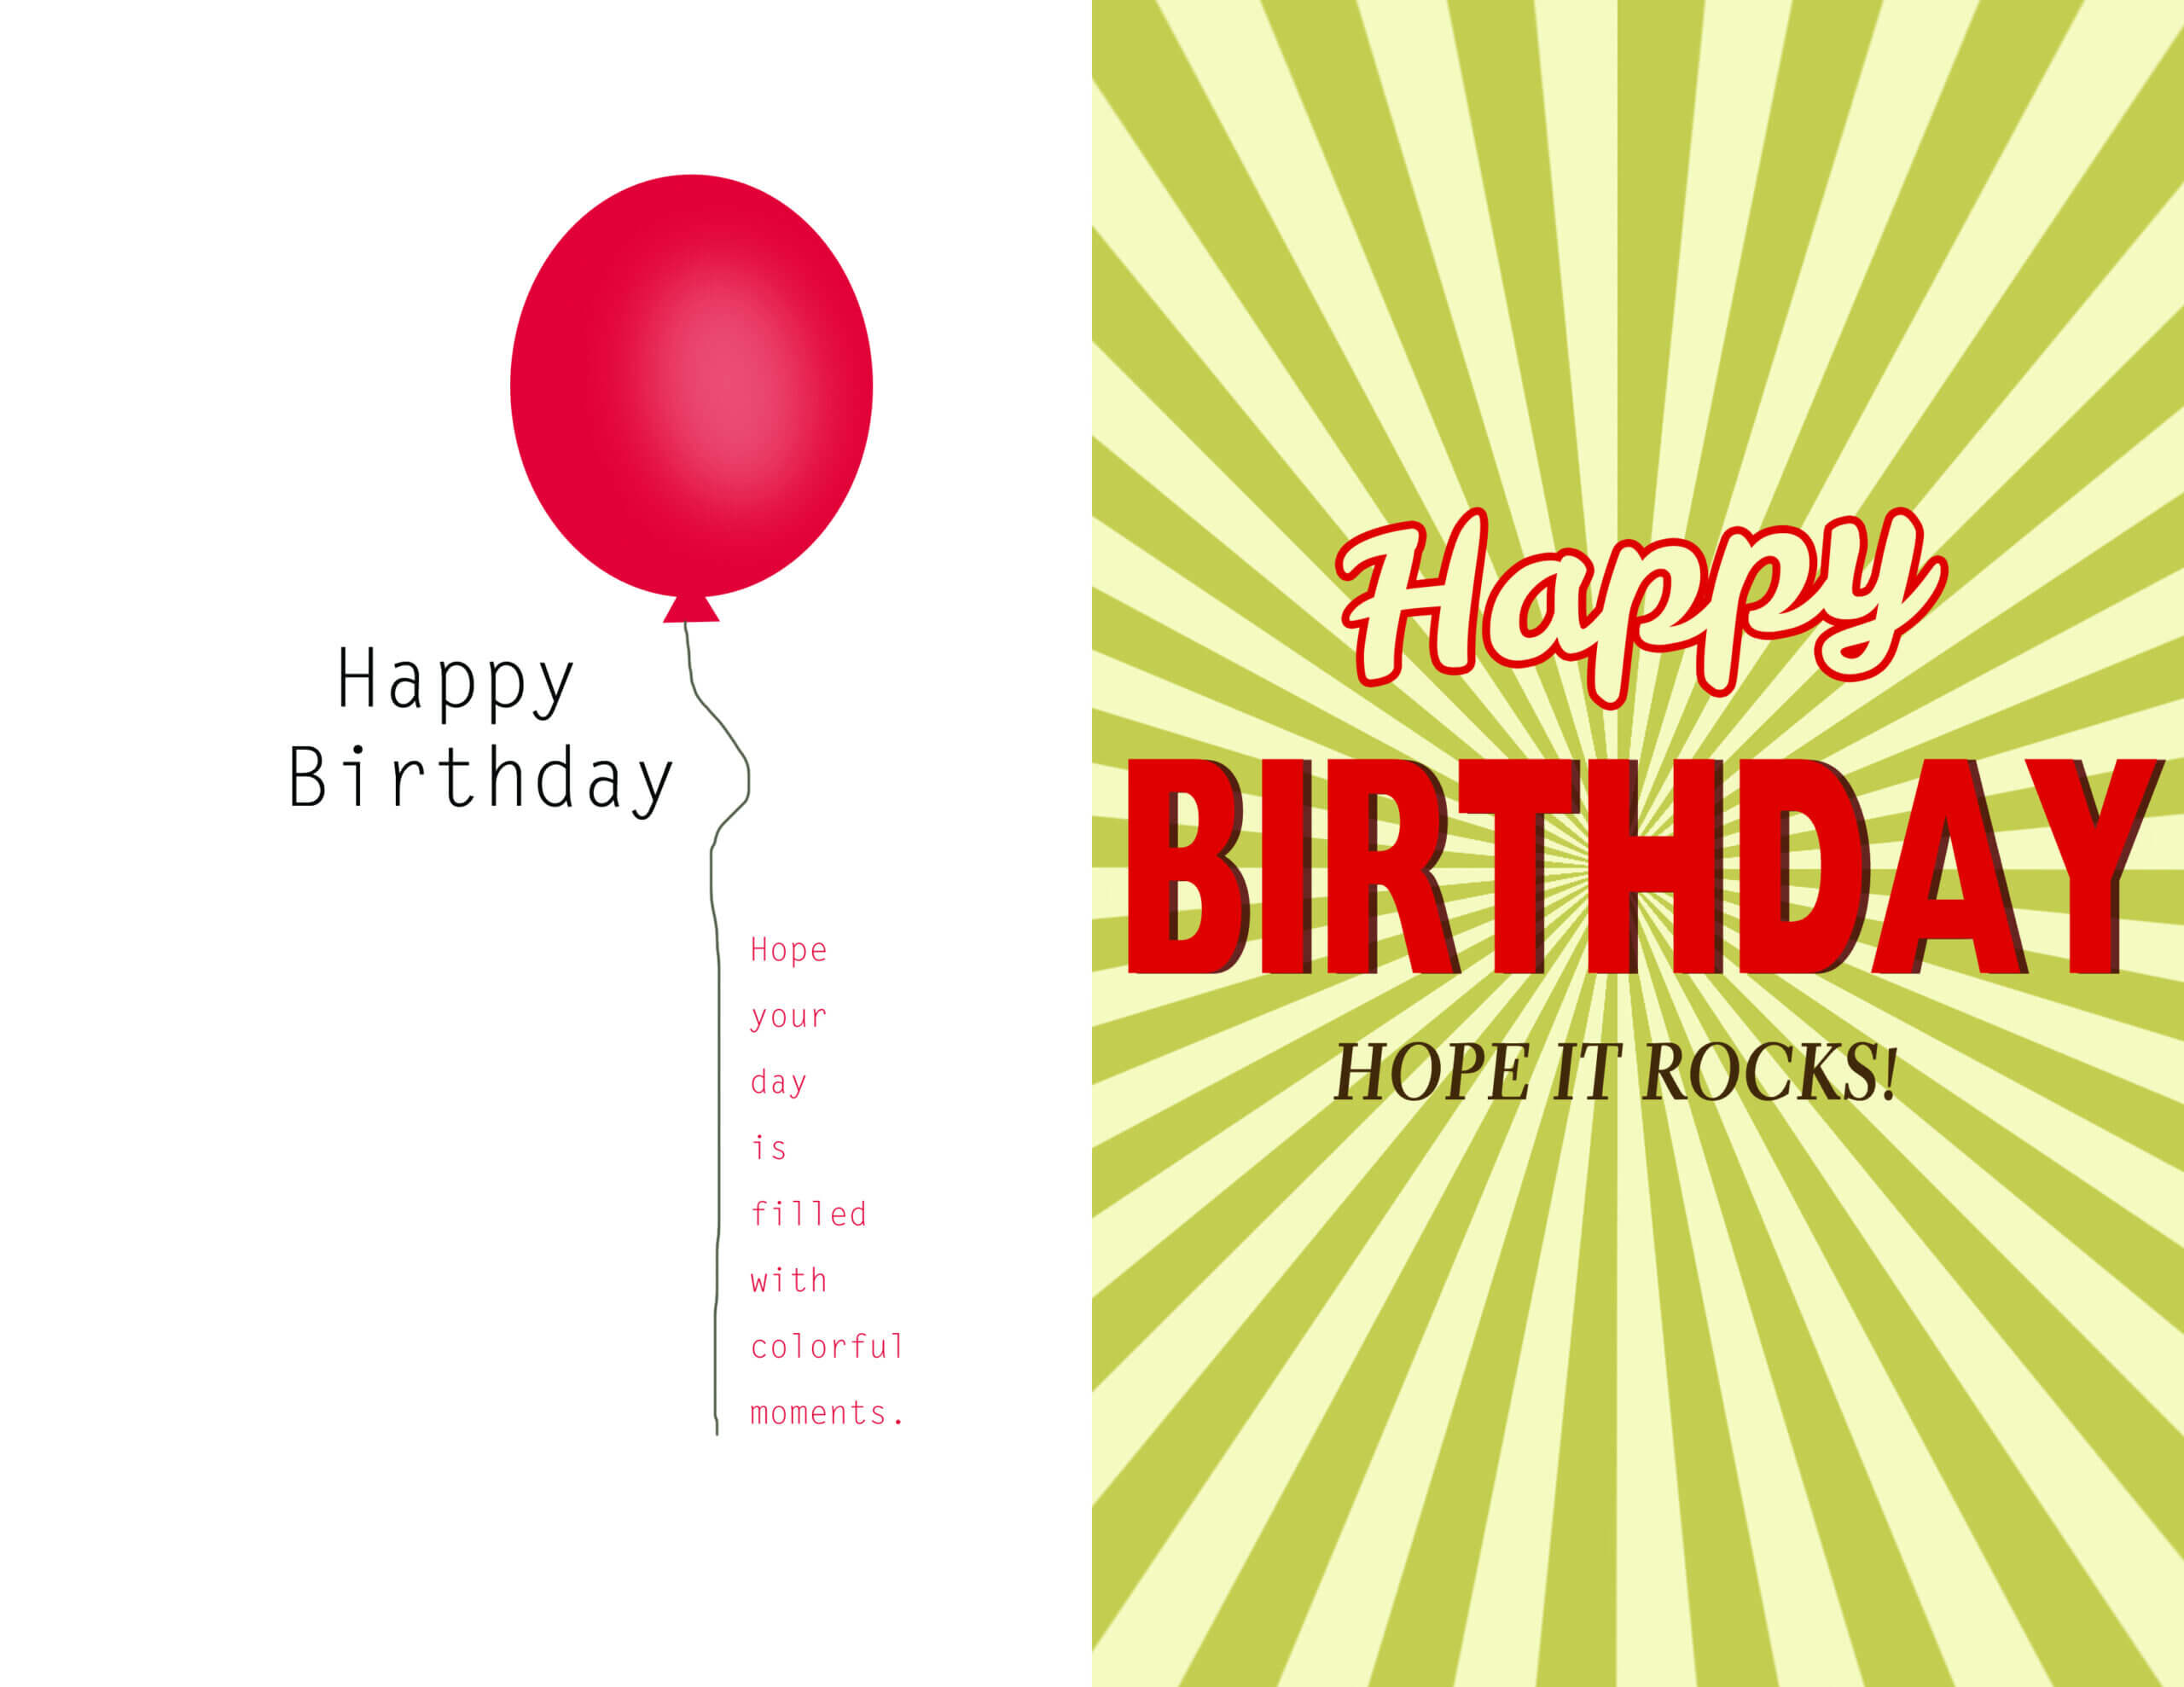 024 Photoshop Greeting Card Template Ideas Birthday For Photoshop Birthday Card Template Free